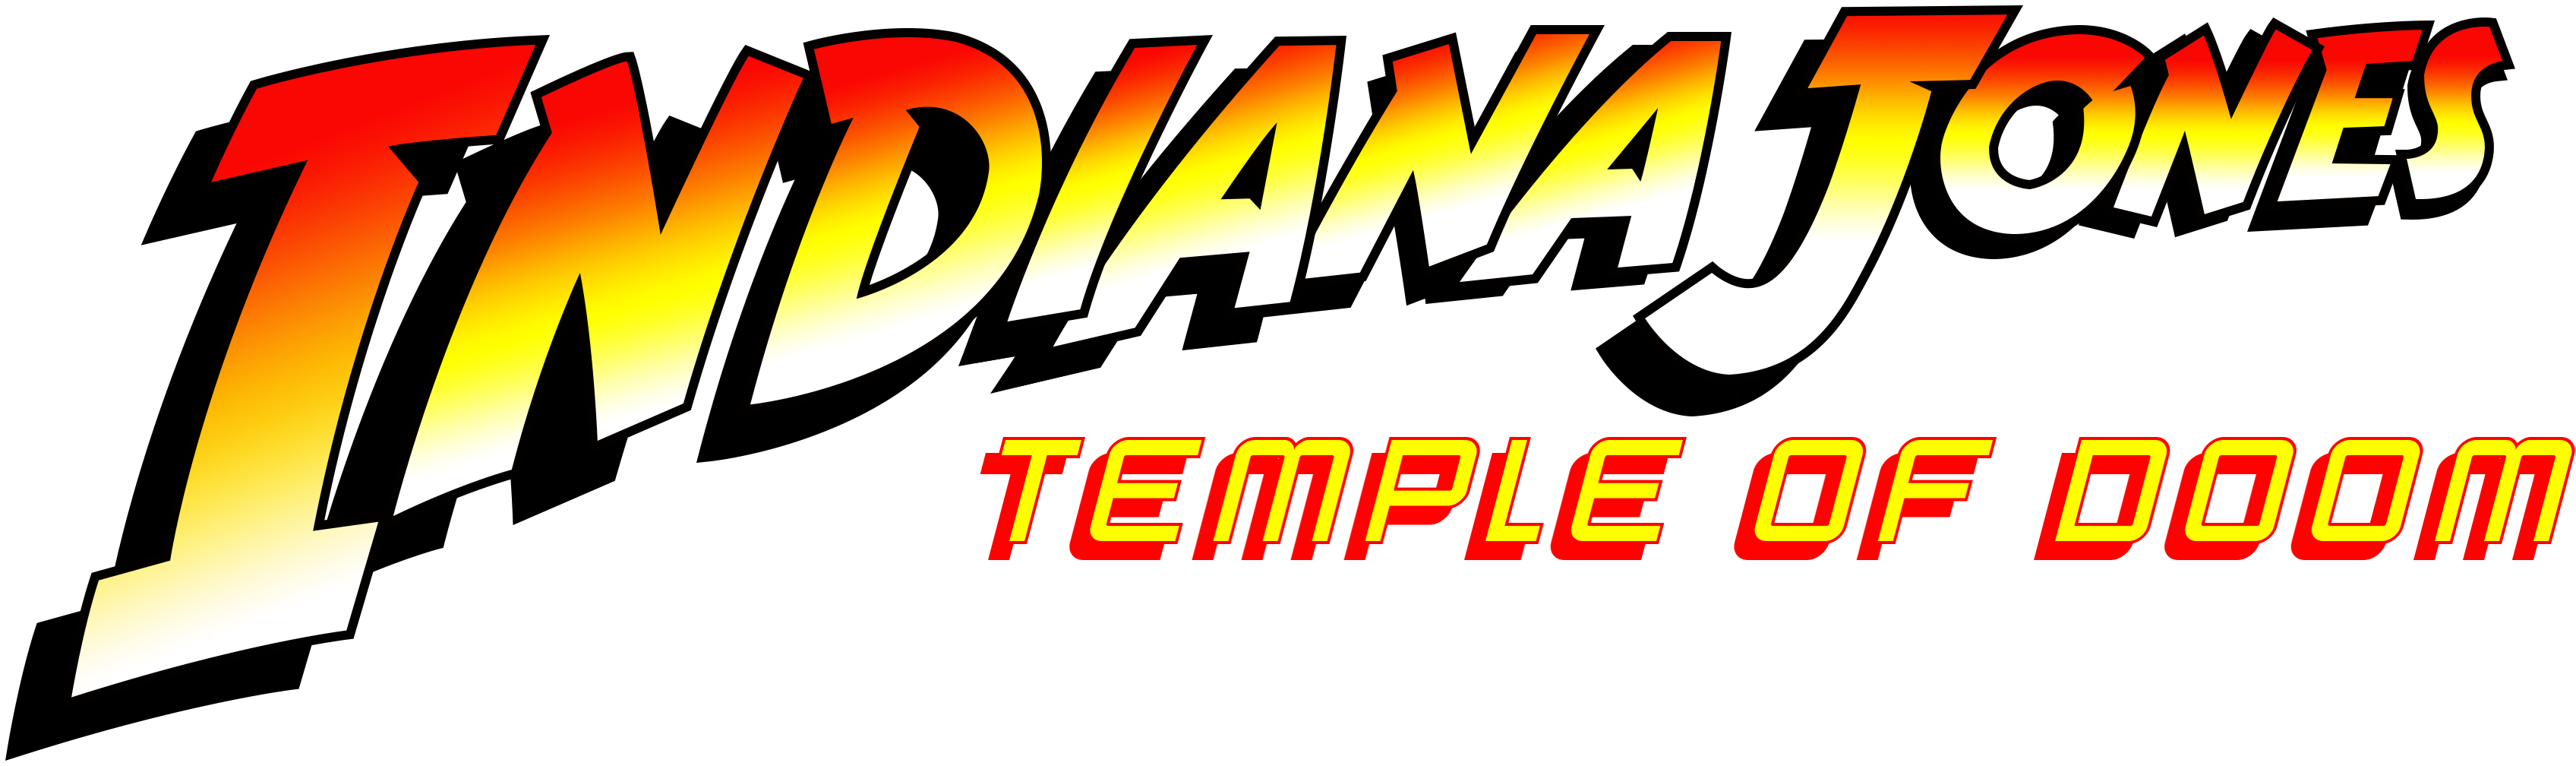 Indiana Jones and the Temple of Doom Images - LaunchBox Games Database